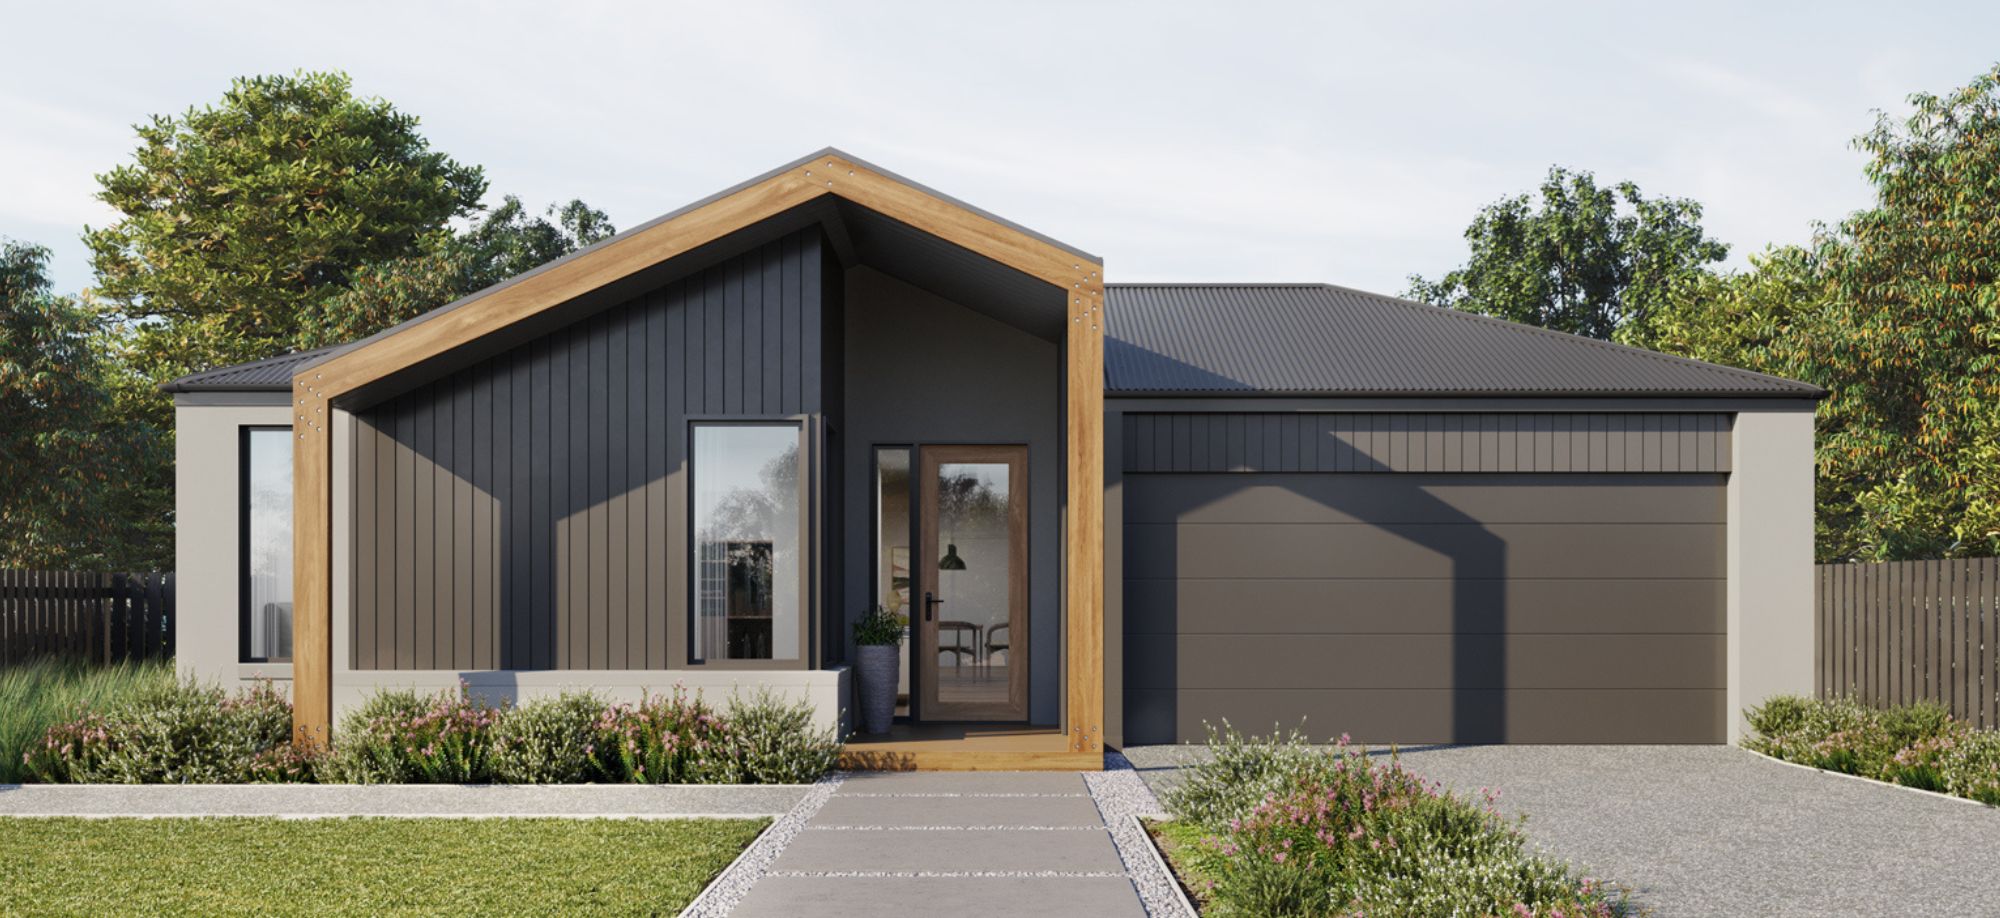 The Element facade is a modern design that features an asymmetrical gable roof.